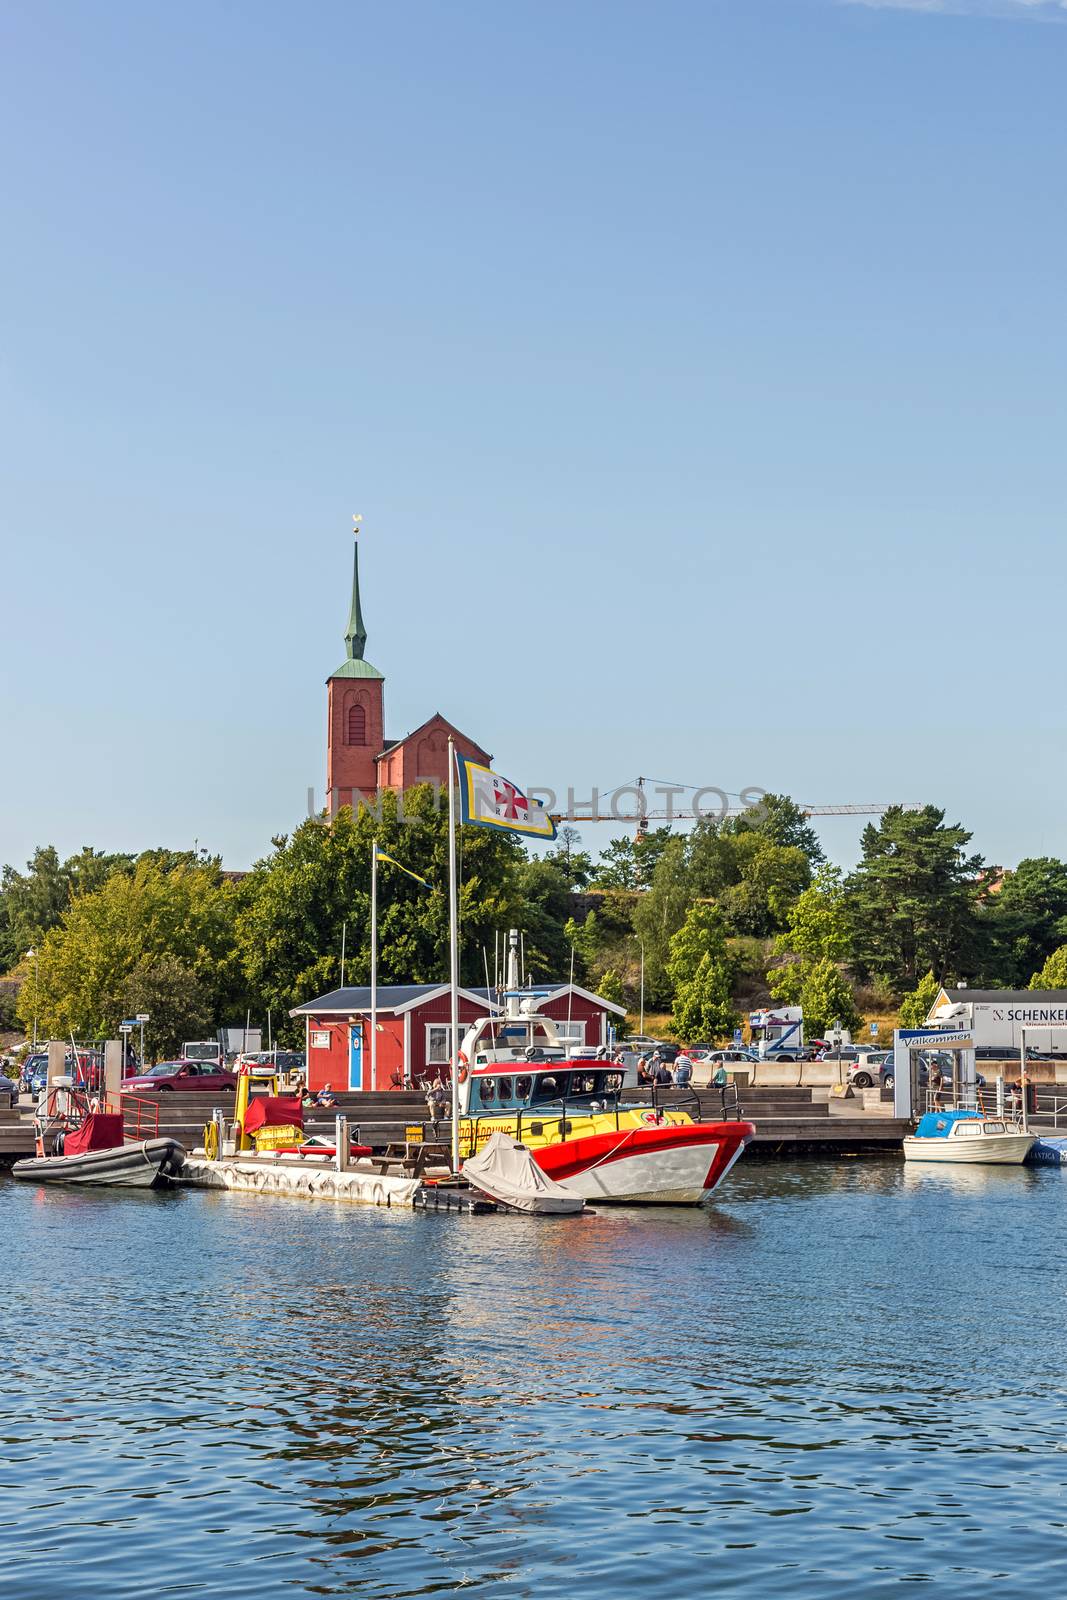 Scenes from Nynashamn, a big center for ferry transport offering services to Gotland, Poland and Russia. The city is also a well-known place of sailing events.